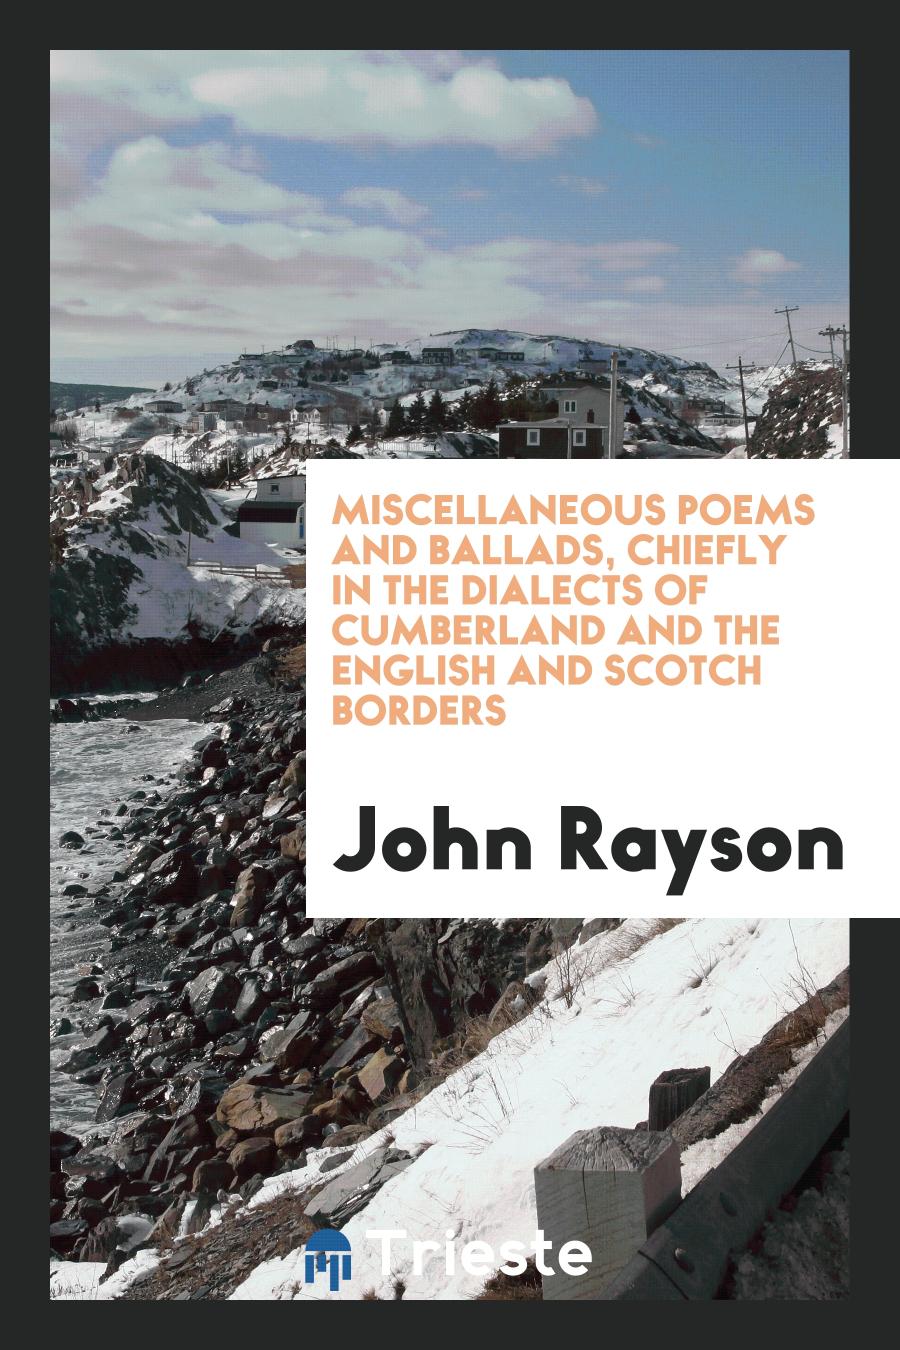 Miscellaneous Poems and Ballads, Chiefly in the Dialects of Cumberland and the English and Scotch Borders